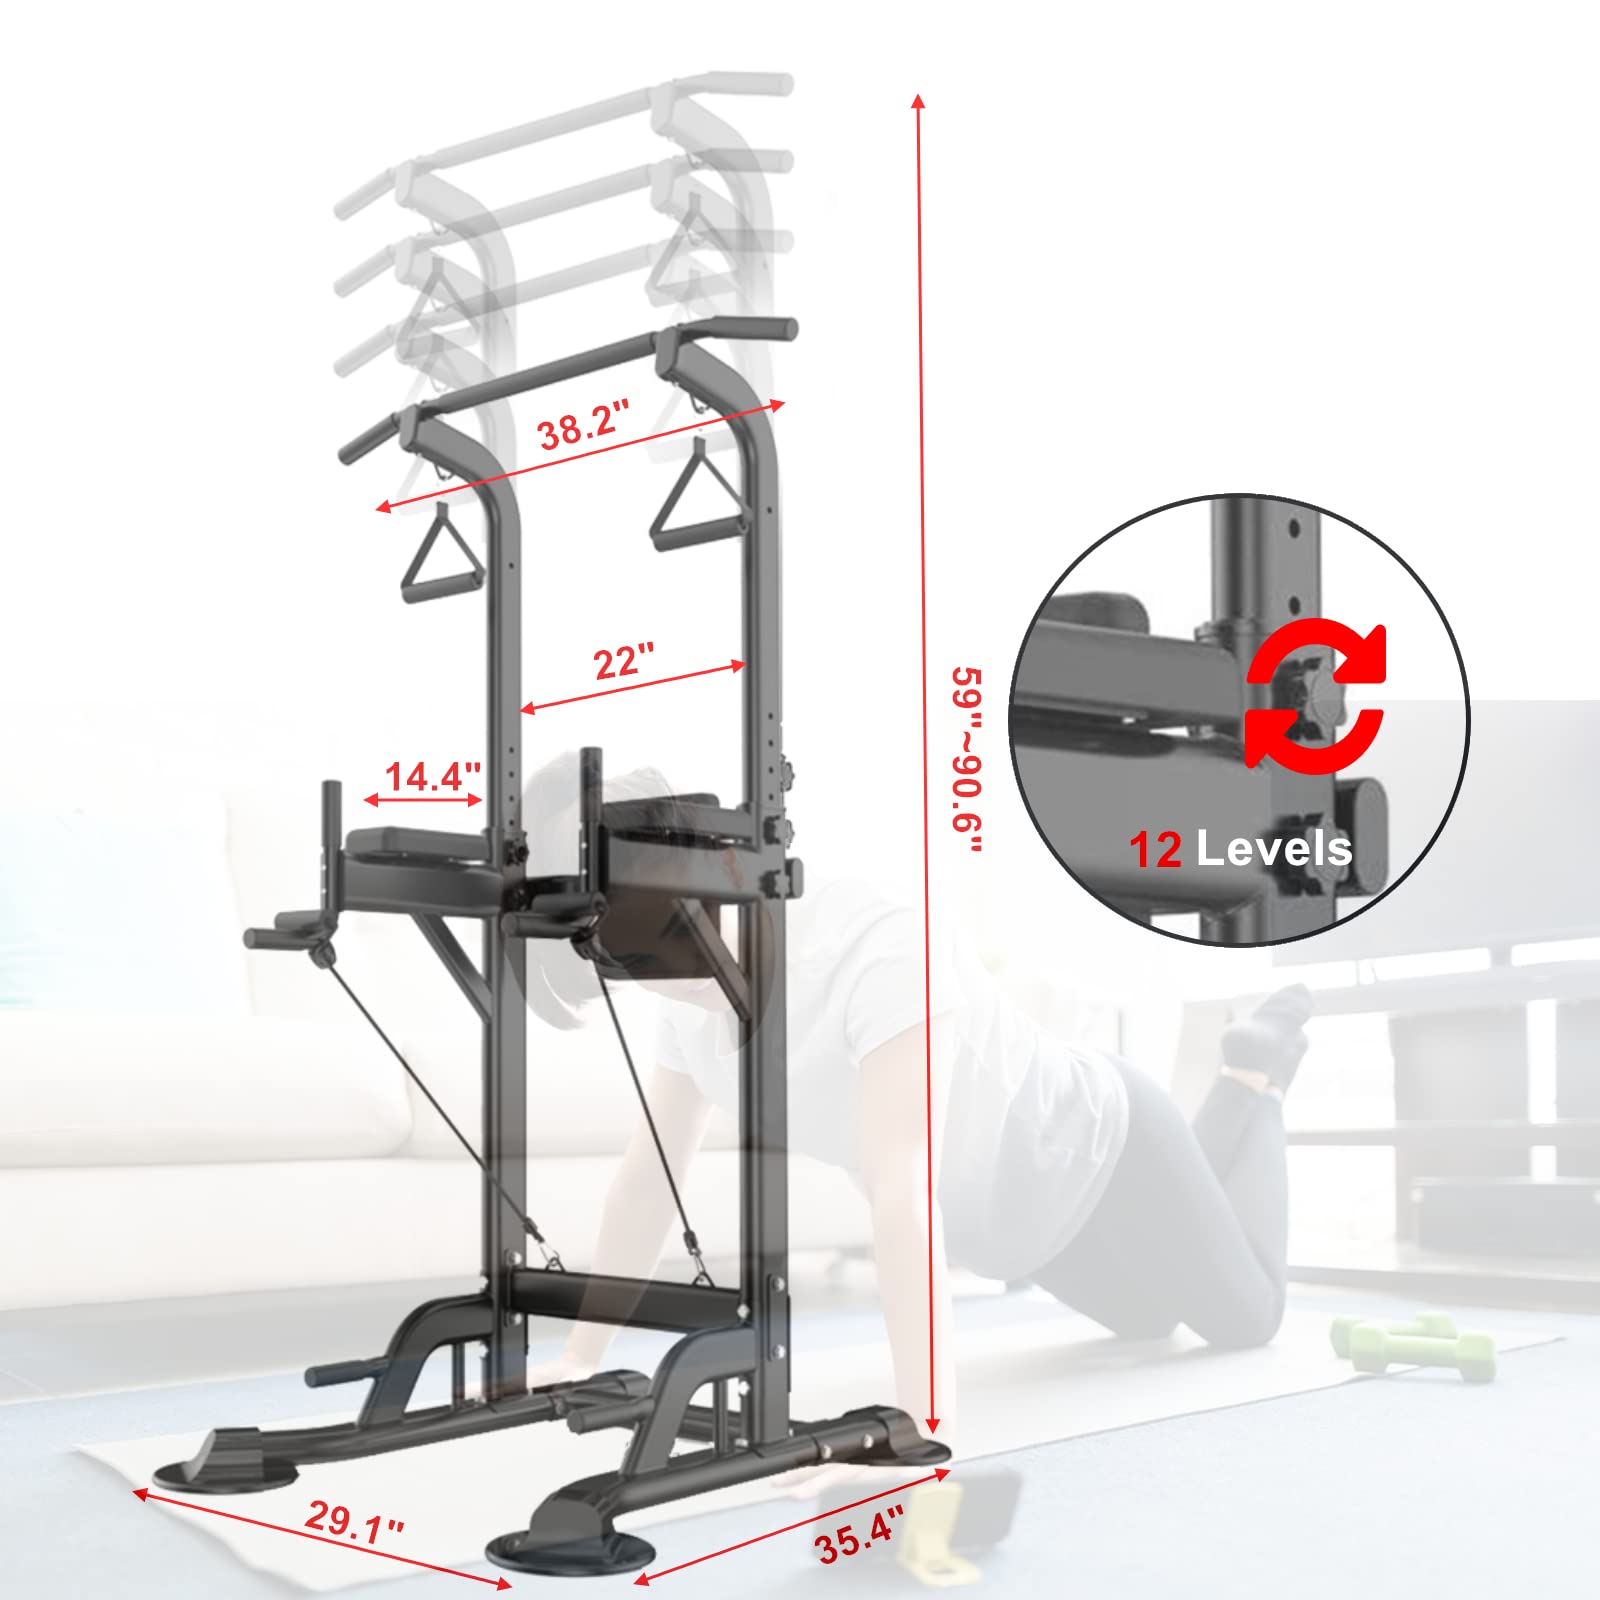 HOMEZILLIONS Power Tower Dip Station Pull Up Bar Exercise Tower Adjustable Pull Up Station for Home Gym Multi-Function Strength Training Fitn